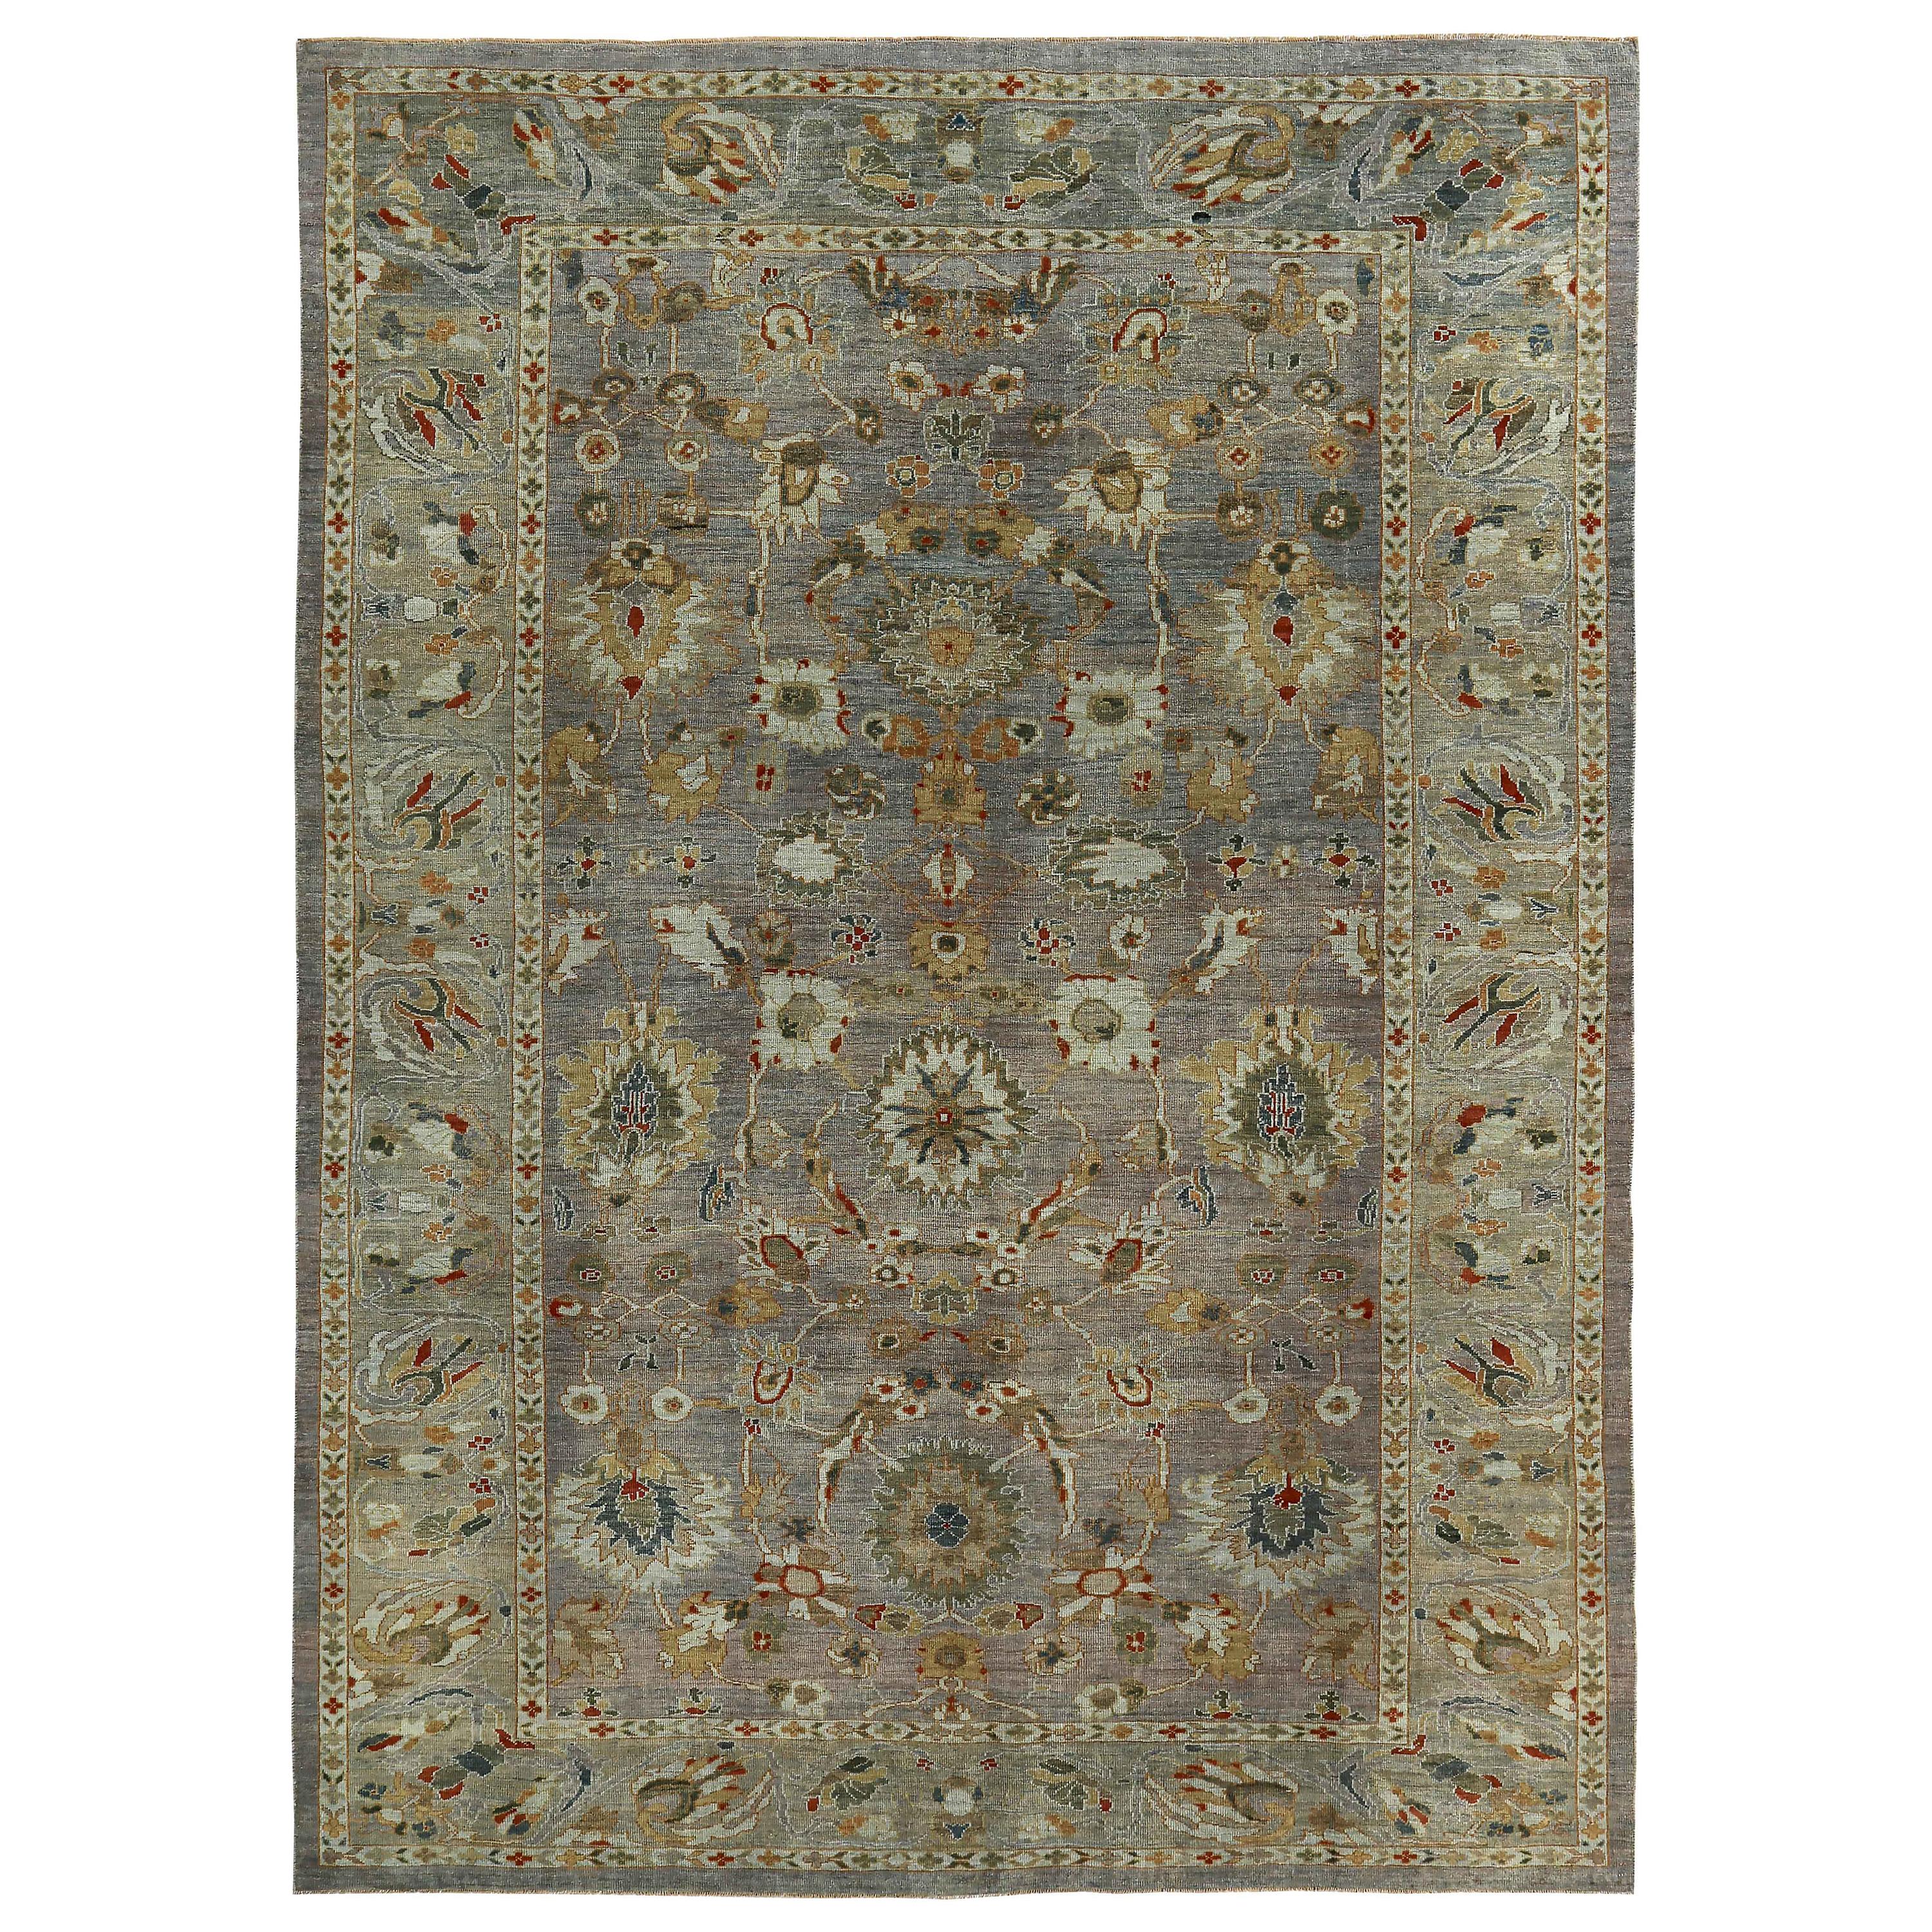 New Turkish Rug Sultanabad Design with Green and Red Botanical Details